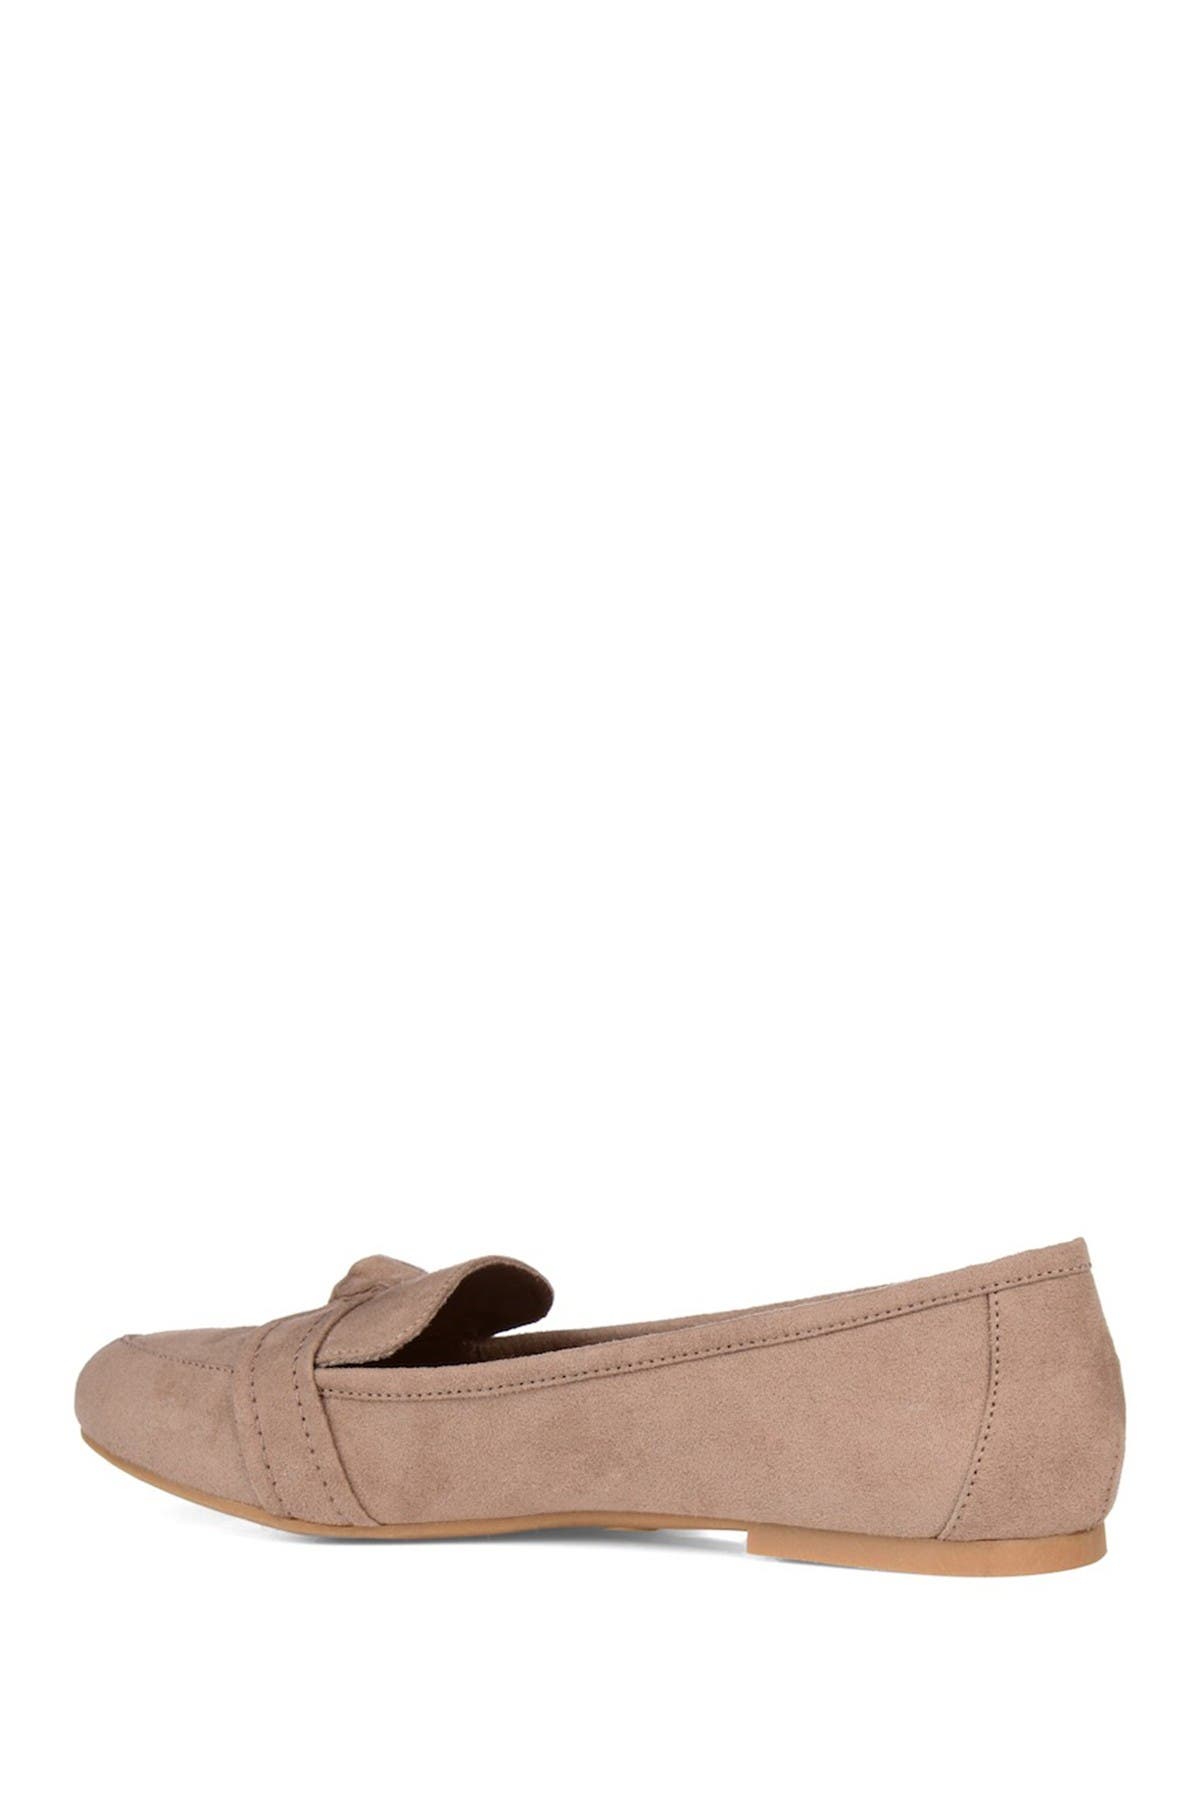 Journee Collection Marci Knotted Strap Loafer In Medium Beige